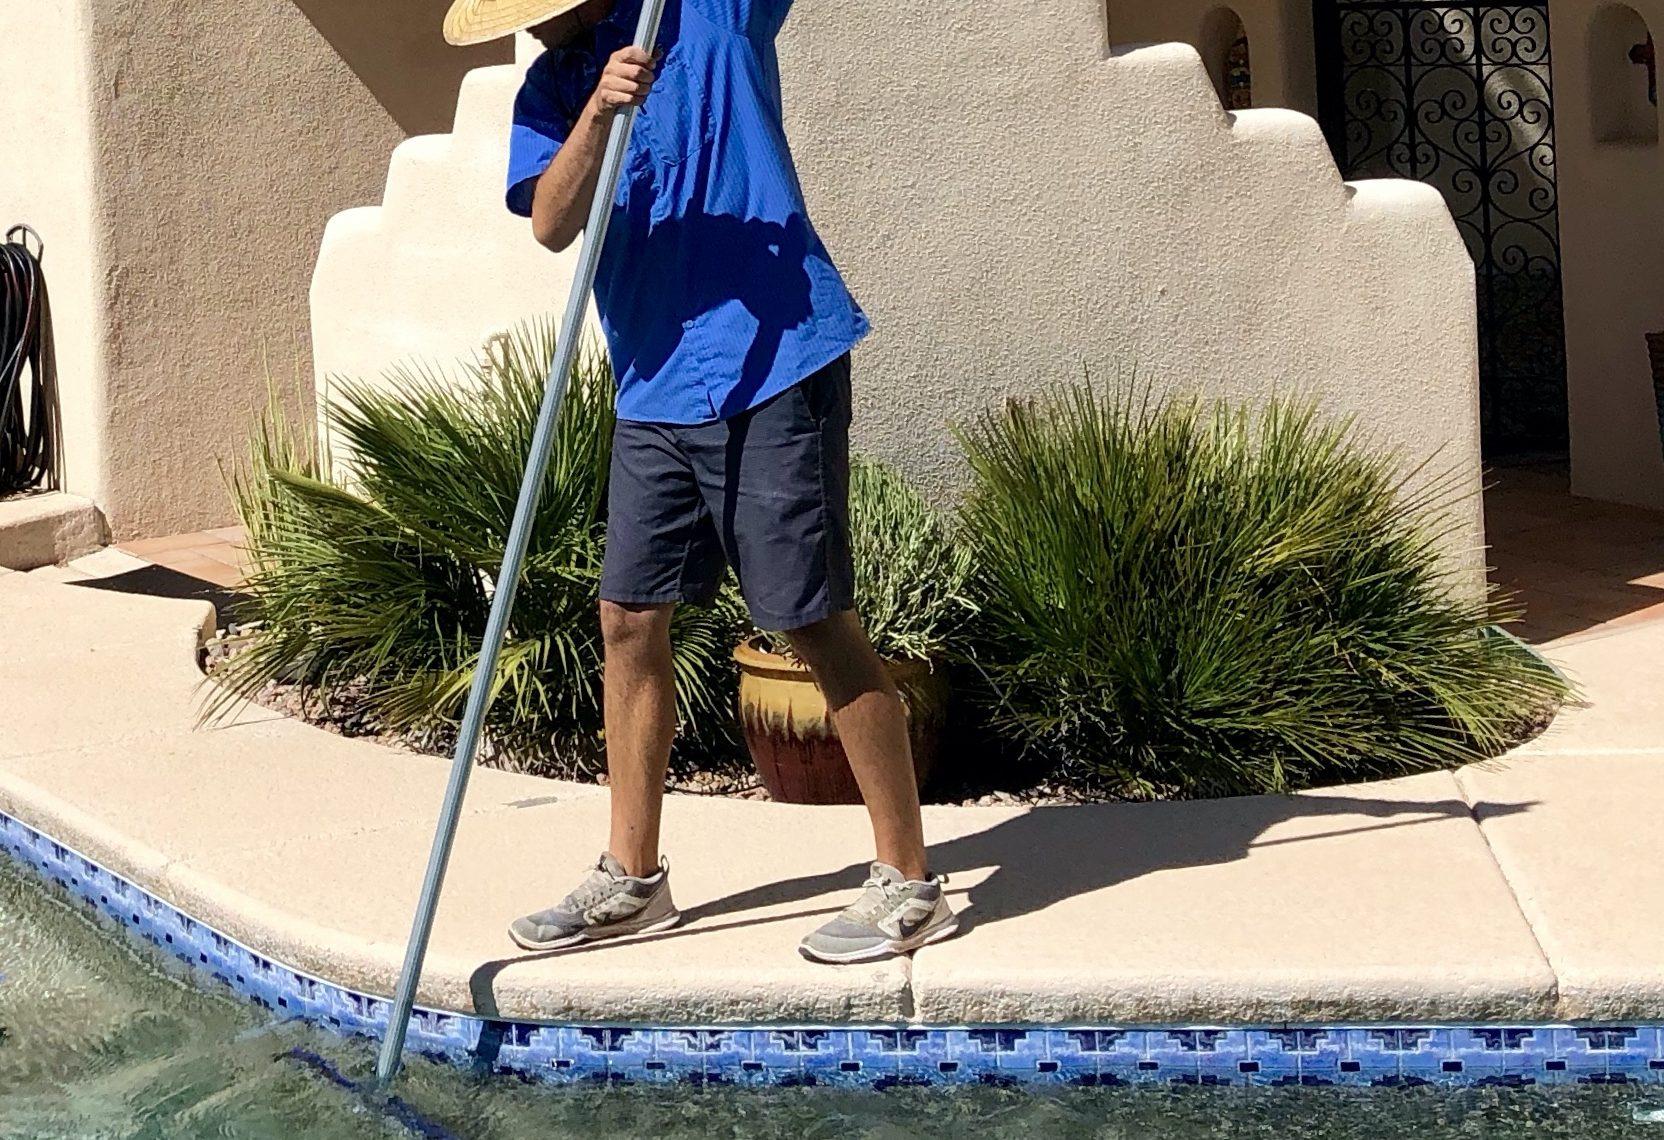 Tucson Pool and Spa team member cleaning the pool Tucson Pool & Spa Tucson (520)296-0993